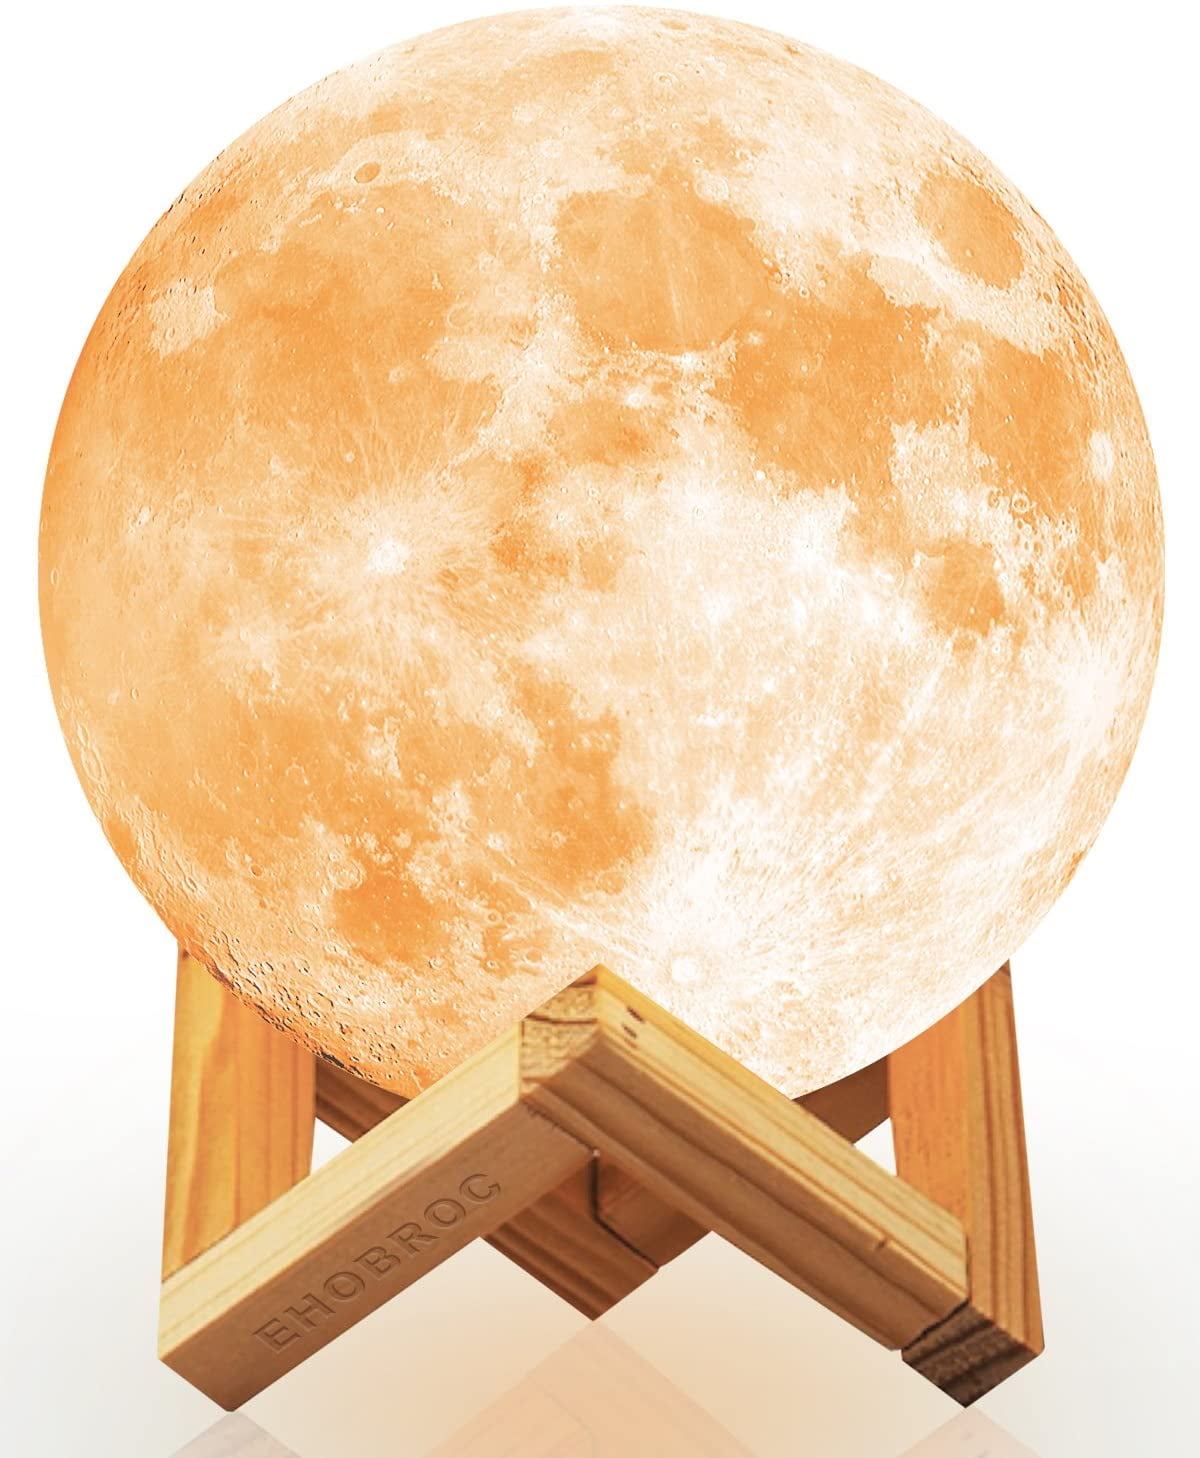 BRIGHTWORLD Moon Lamp Moon Night Light 3D Printed 4.7IN Lunar Lamp for Kids Gift 